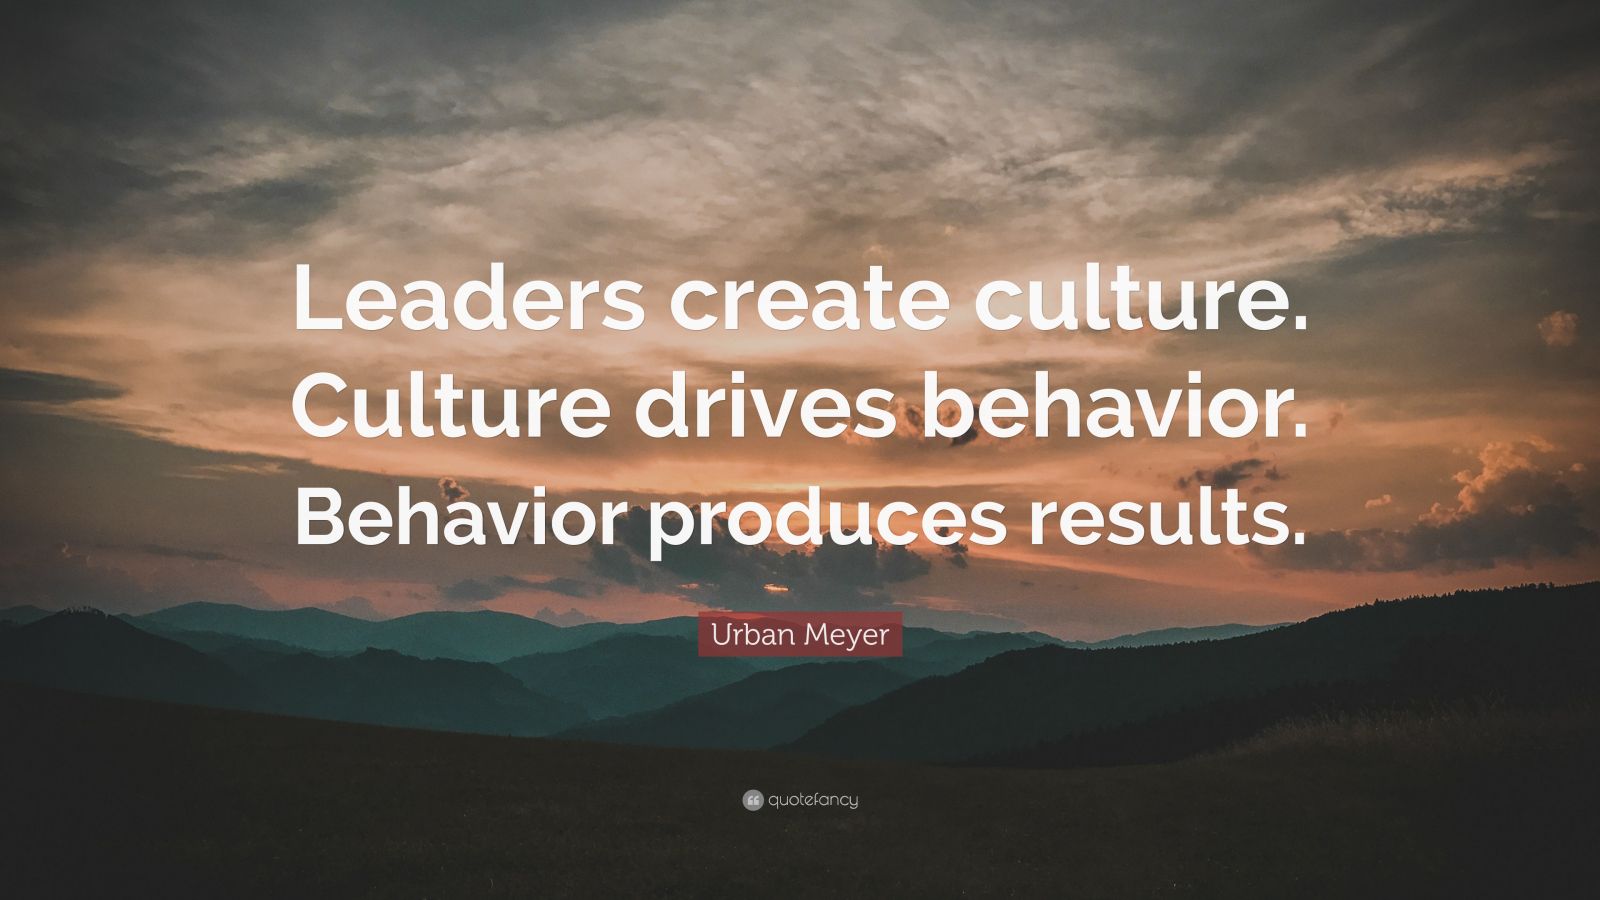 Urban Meyer Quote: “Leaders create culture. Culture drives behavior